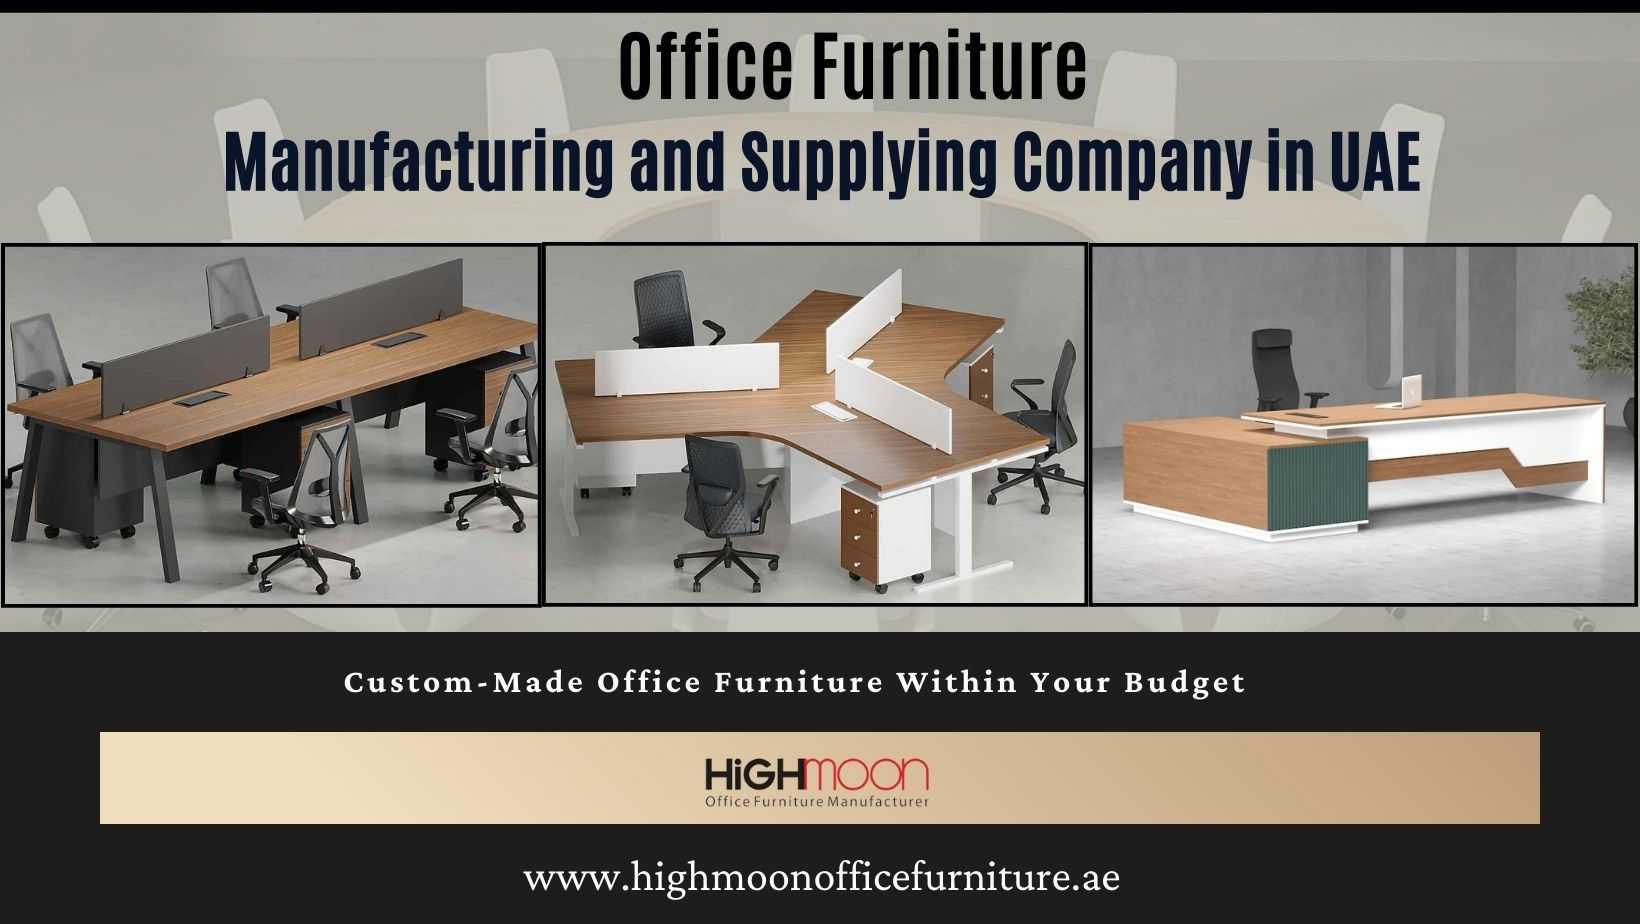 Office Furniture Manufacturing and Suppliers Company in UAE